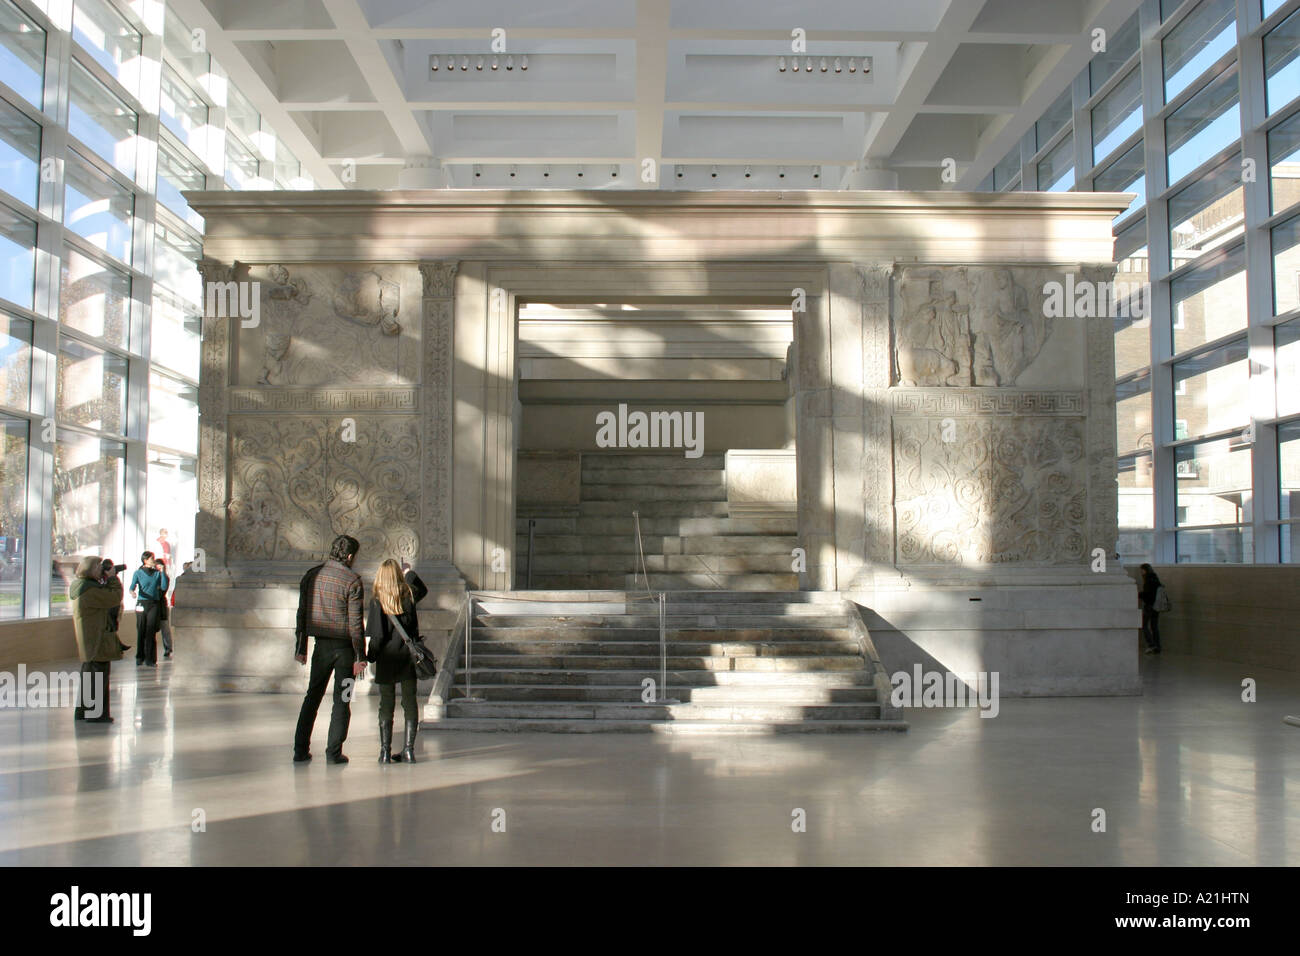 The Ara Pacis was an ancient Roman alter in Rome where the Via Flaminia crossed the Campus Martius.and is now being restored. Stock Photo